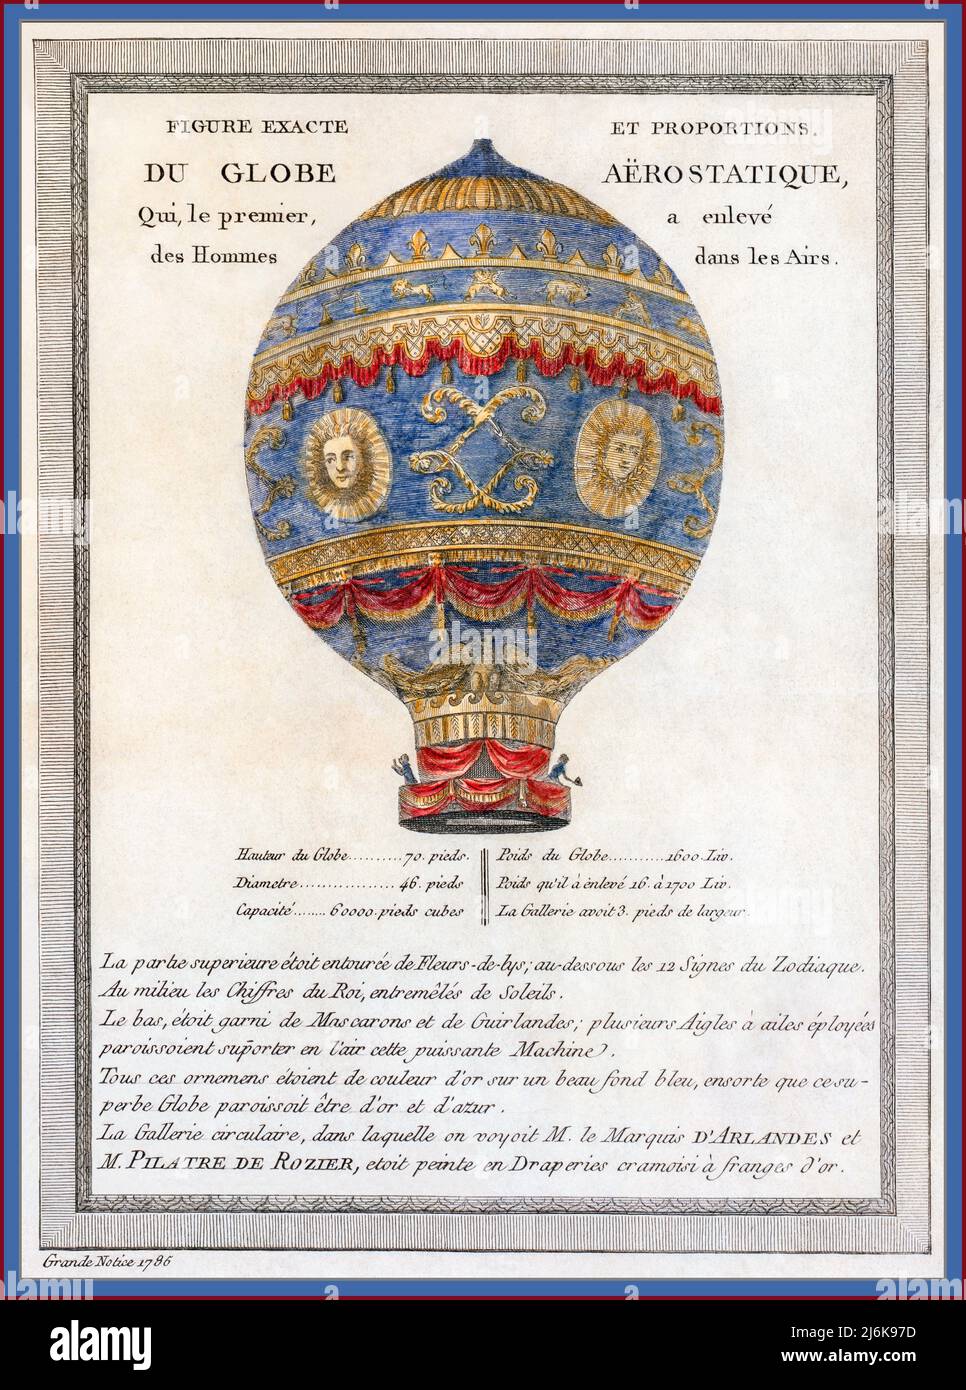 MONTGOLFIER BROTHERS BALLOON 1783 description of the historic Montgolfier Brothers' 1783 balloon flight. Illustration with engineering proportions and description. Translation: Figure and exact proportions of the 'Aerostatic Globe', which was the first to first carry men through the air. Engineering data is provided in pre-revolutionary French units: Height of the Globe: 70 pieds Weight of the Globe: 1600 Livres Diameter: 46 pied Lifting capacity: between 1600 and 1700 livres Volume: 60000 pieds cubes Gallery: 3 pieds wide Stock Photo